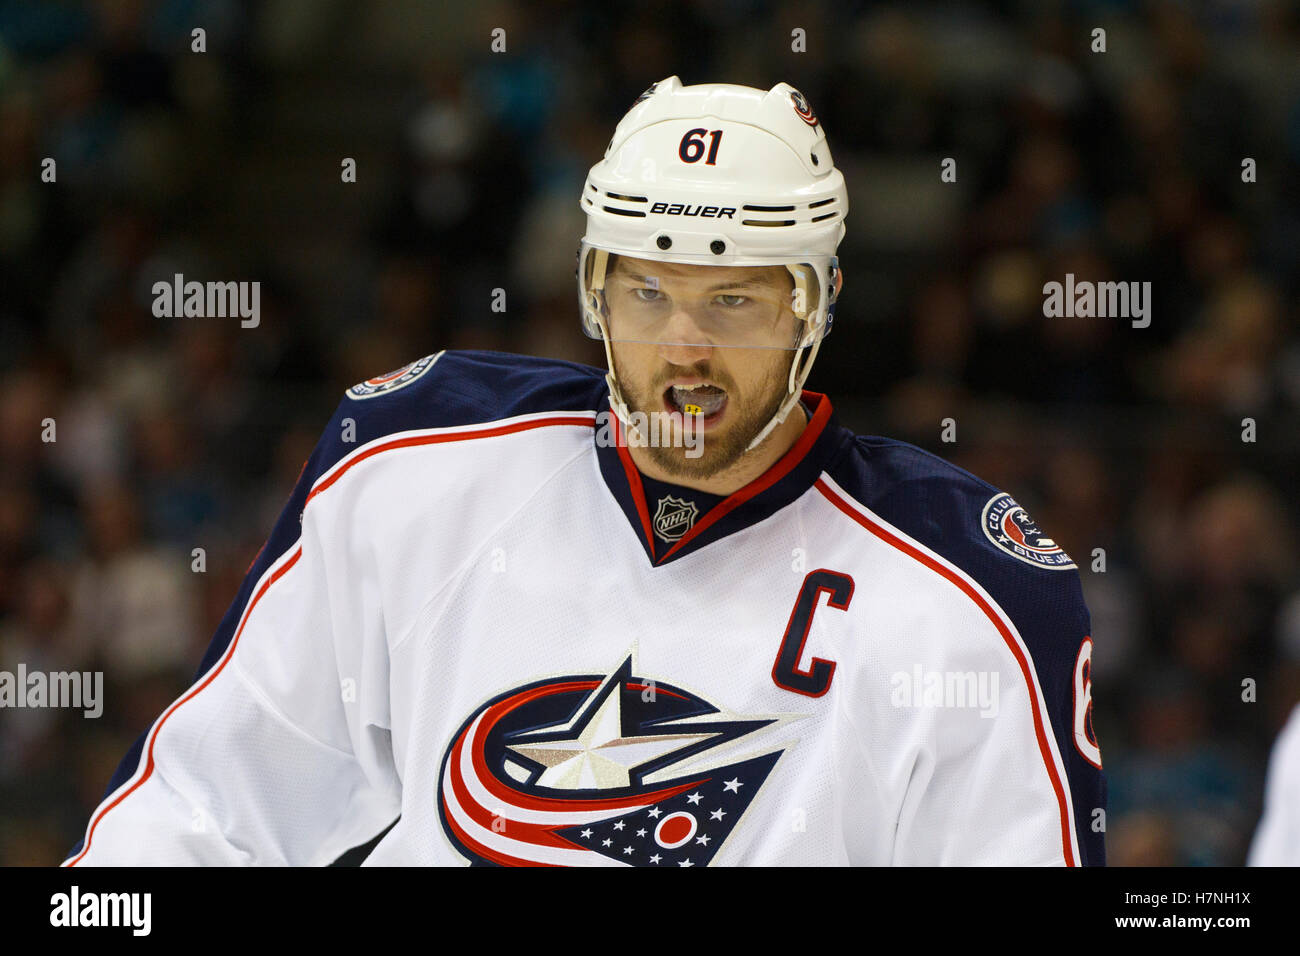 Jan 31, 2012; San Jose, CA, USA; Columbus Blue Jackets right wing Rick Nash (61) before a face off against the San Jose Sharks during the first period at HP Pavilion. San Jose defeated Columbus 6-0. Stock Photo